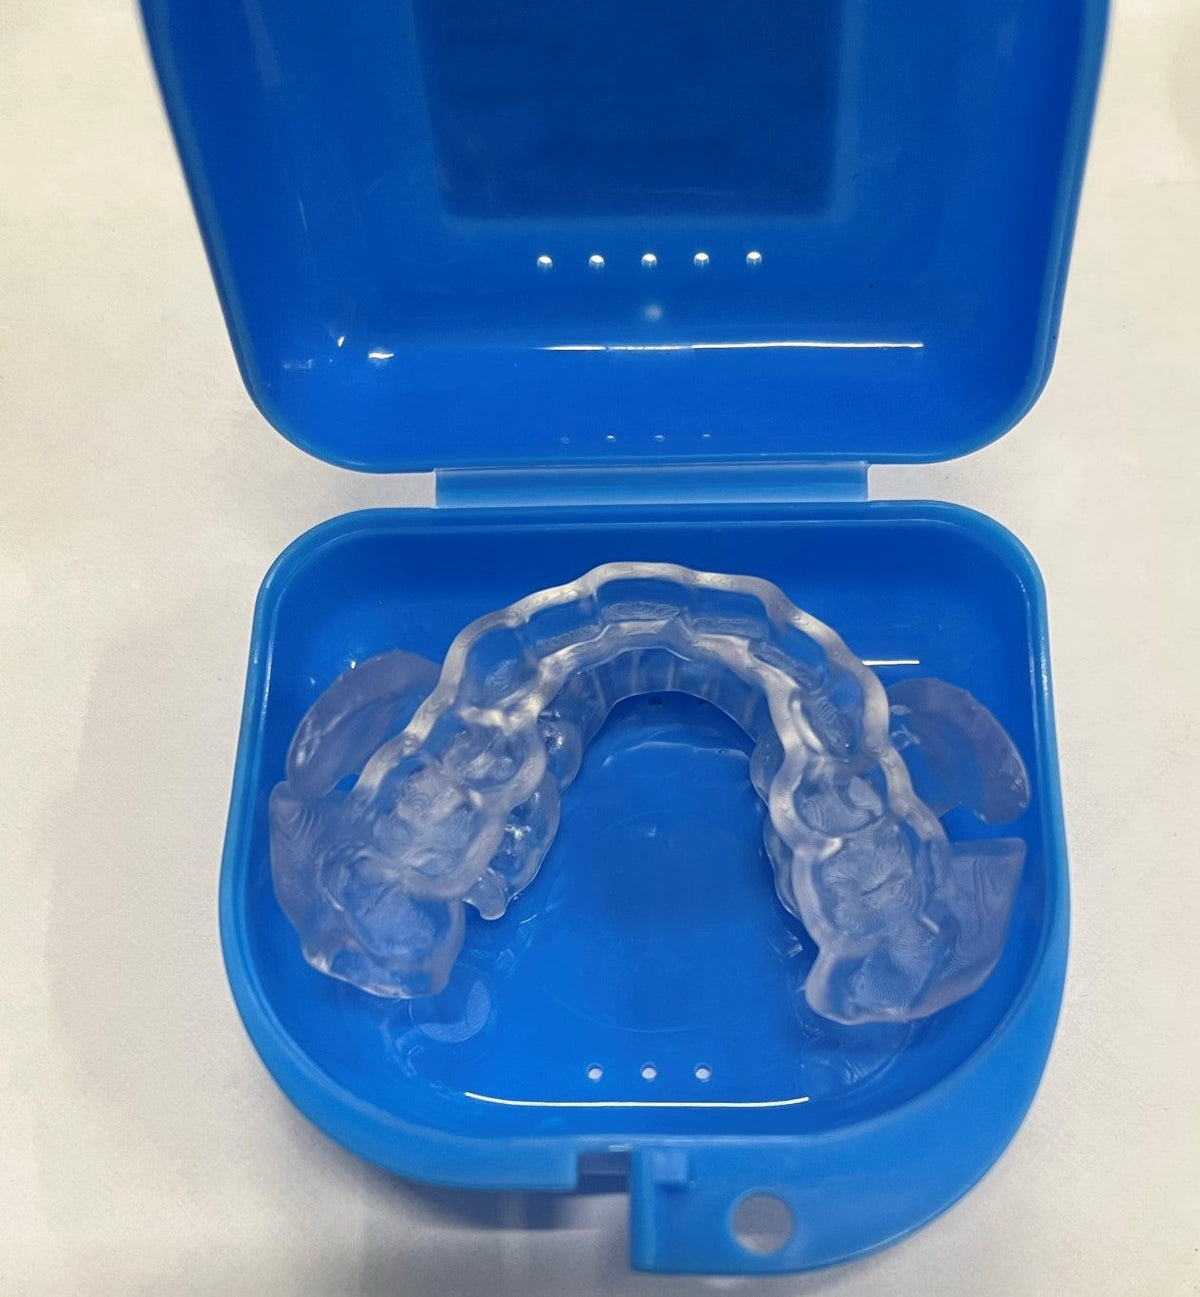 AIΩ GRIT: Oral appliance that improves endurance in the serious athlete